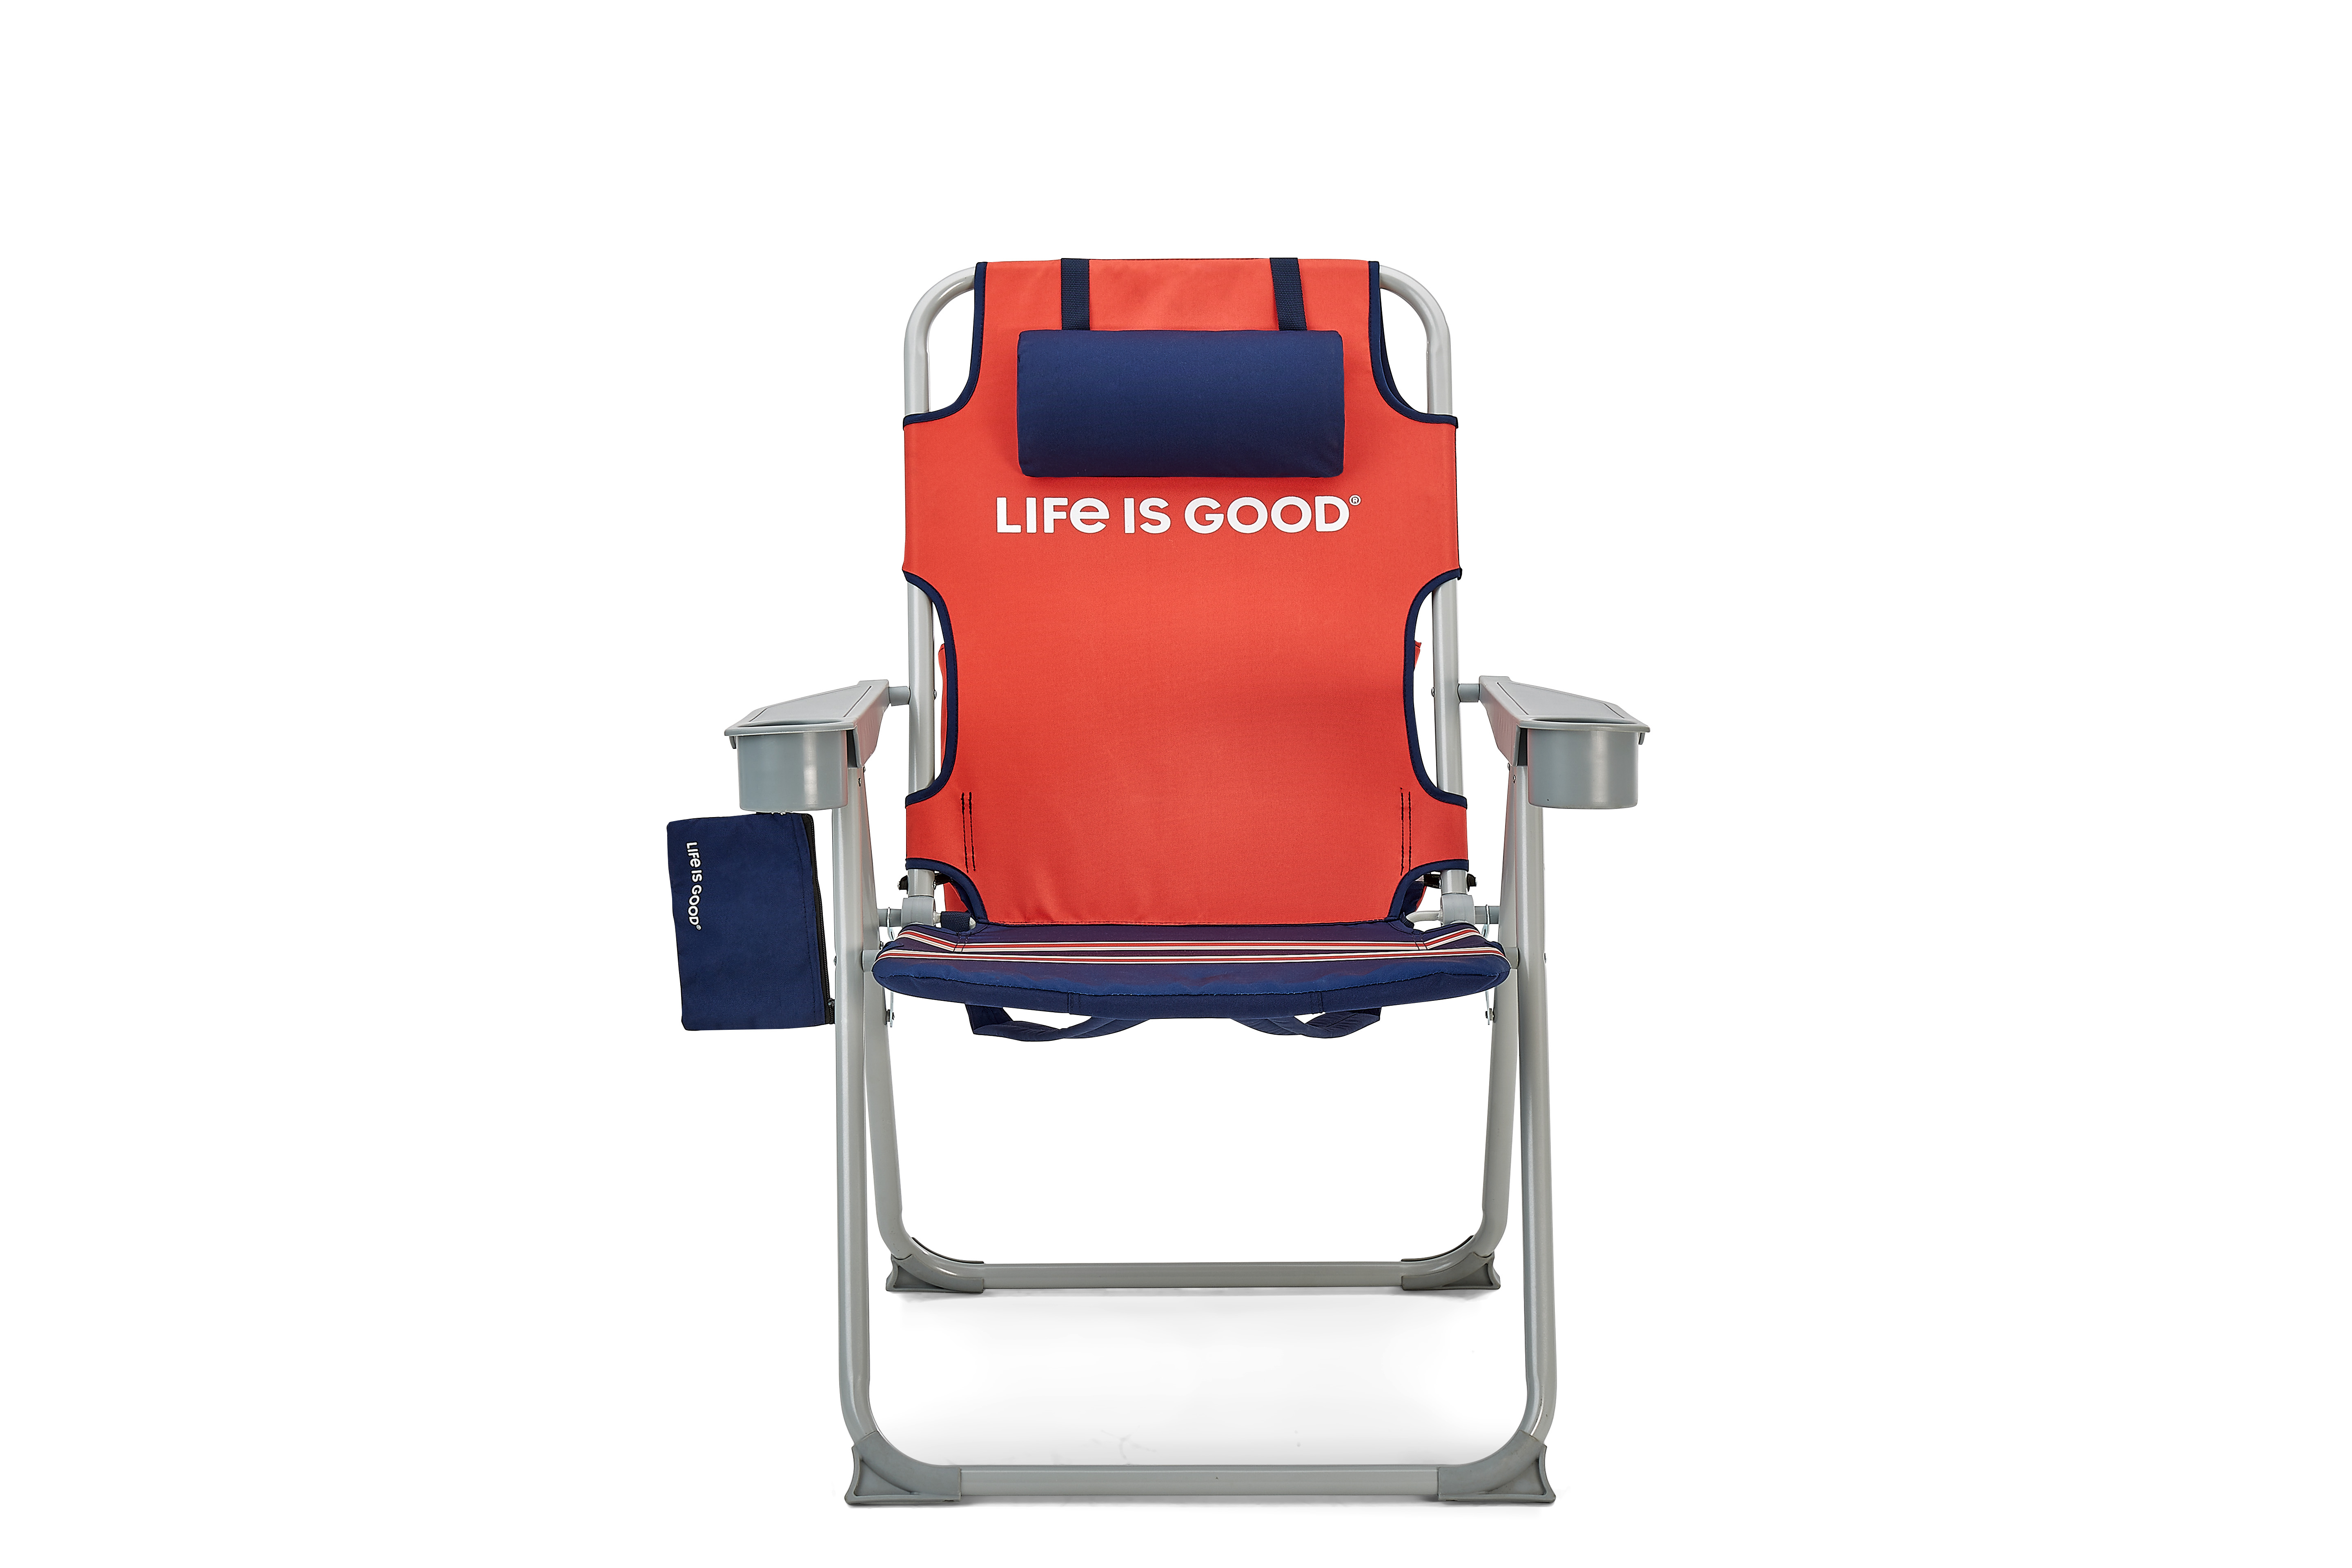 Life is Good Backpack Lawn Chair - Silver Frame - Orange Daisy - image 2 of 2